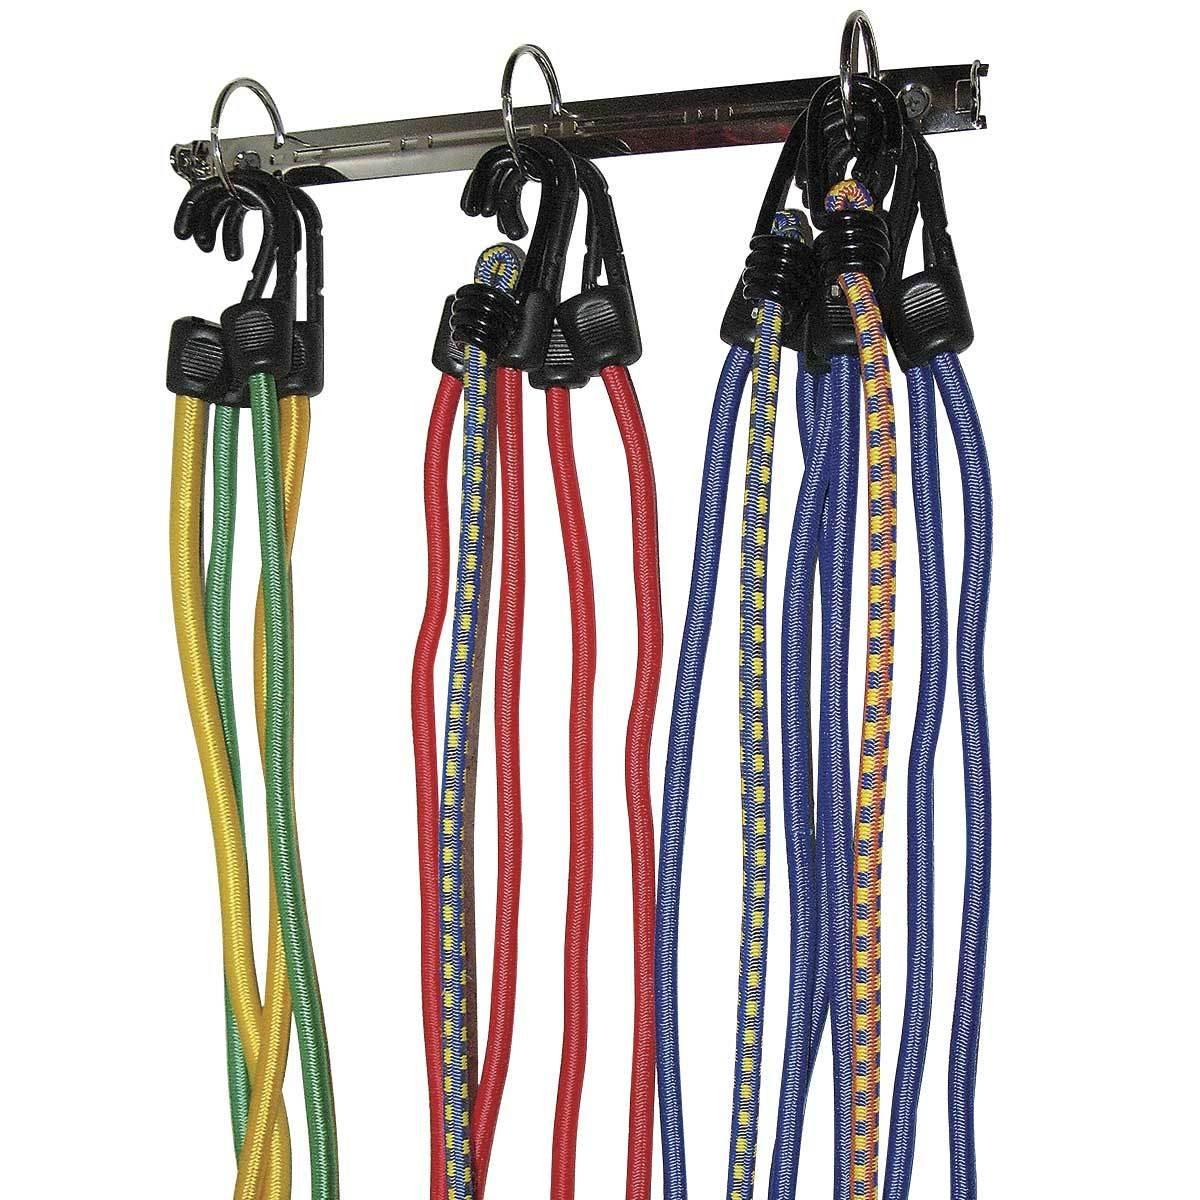 bungee cord uses